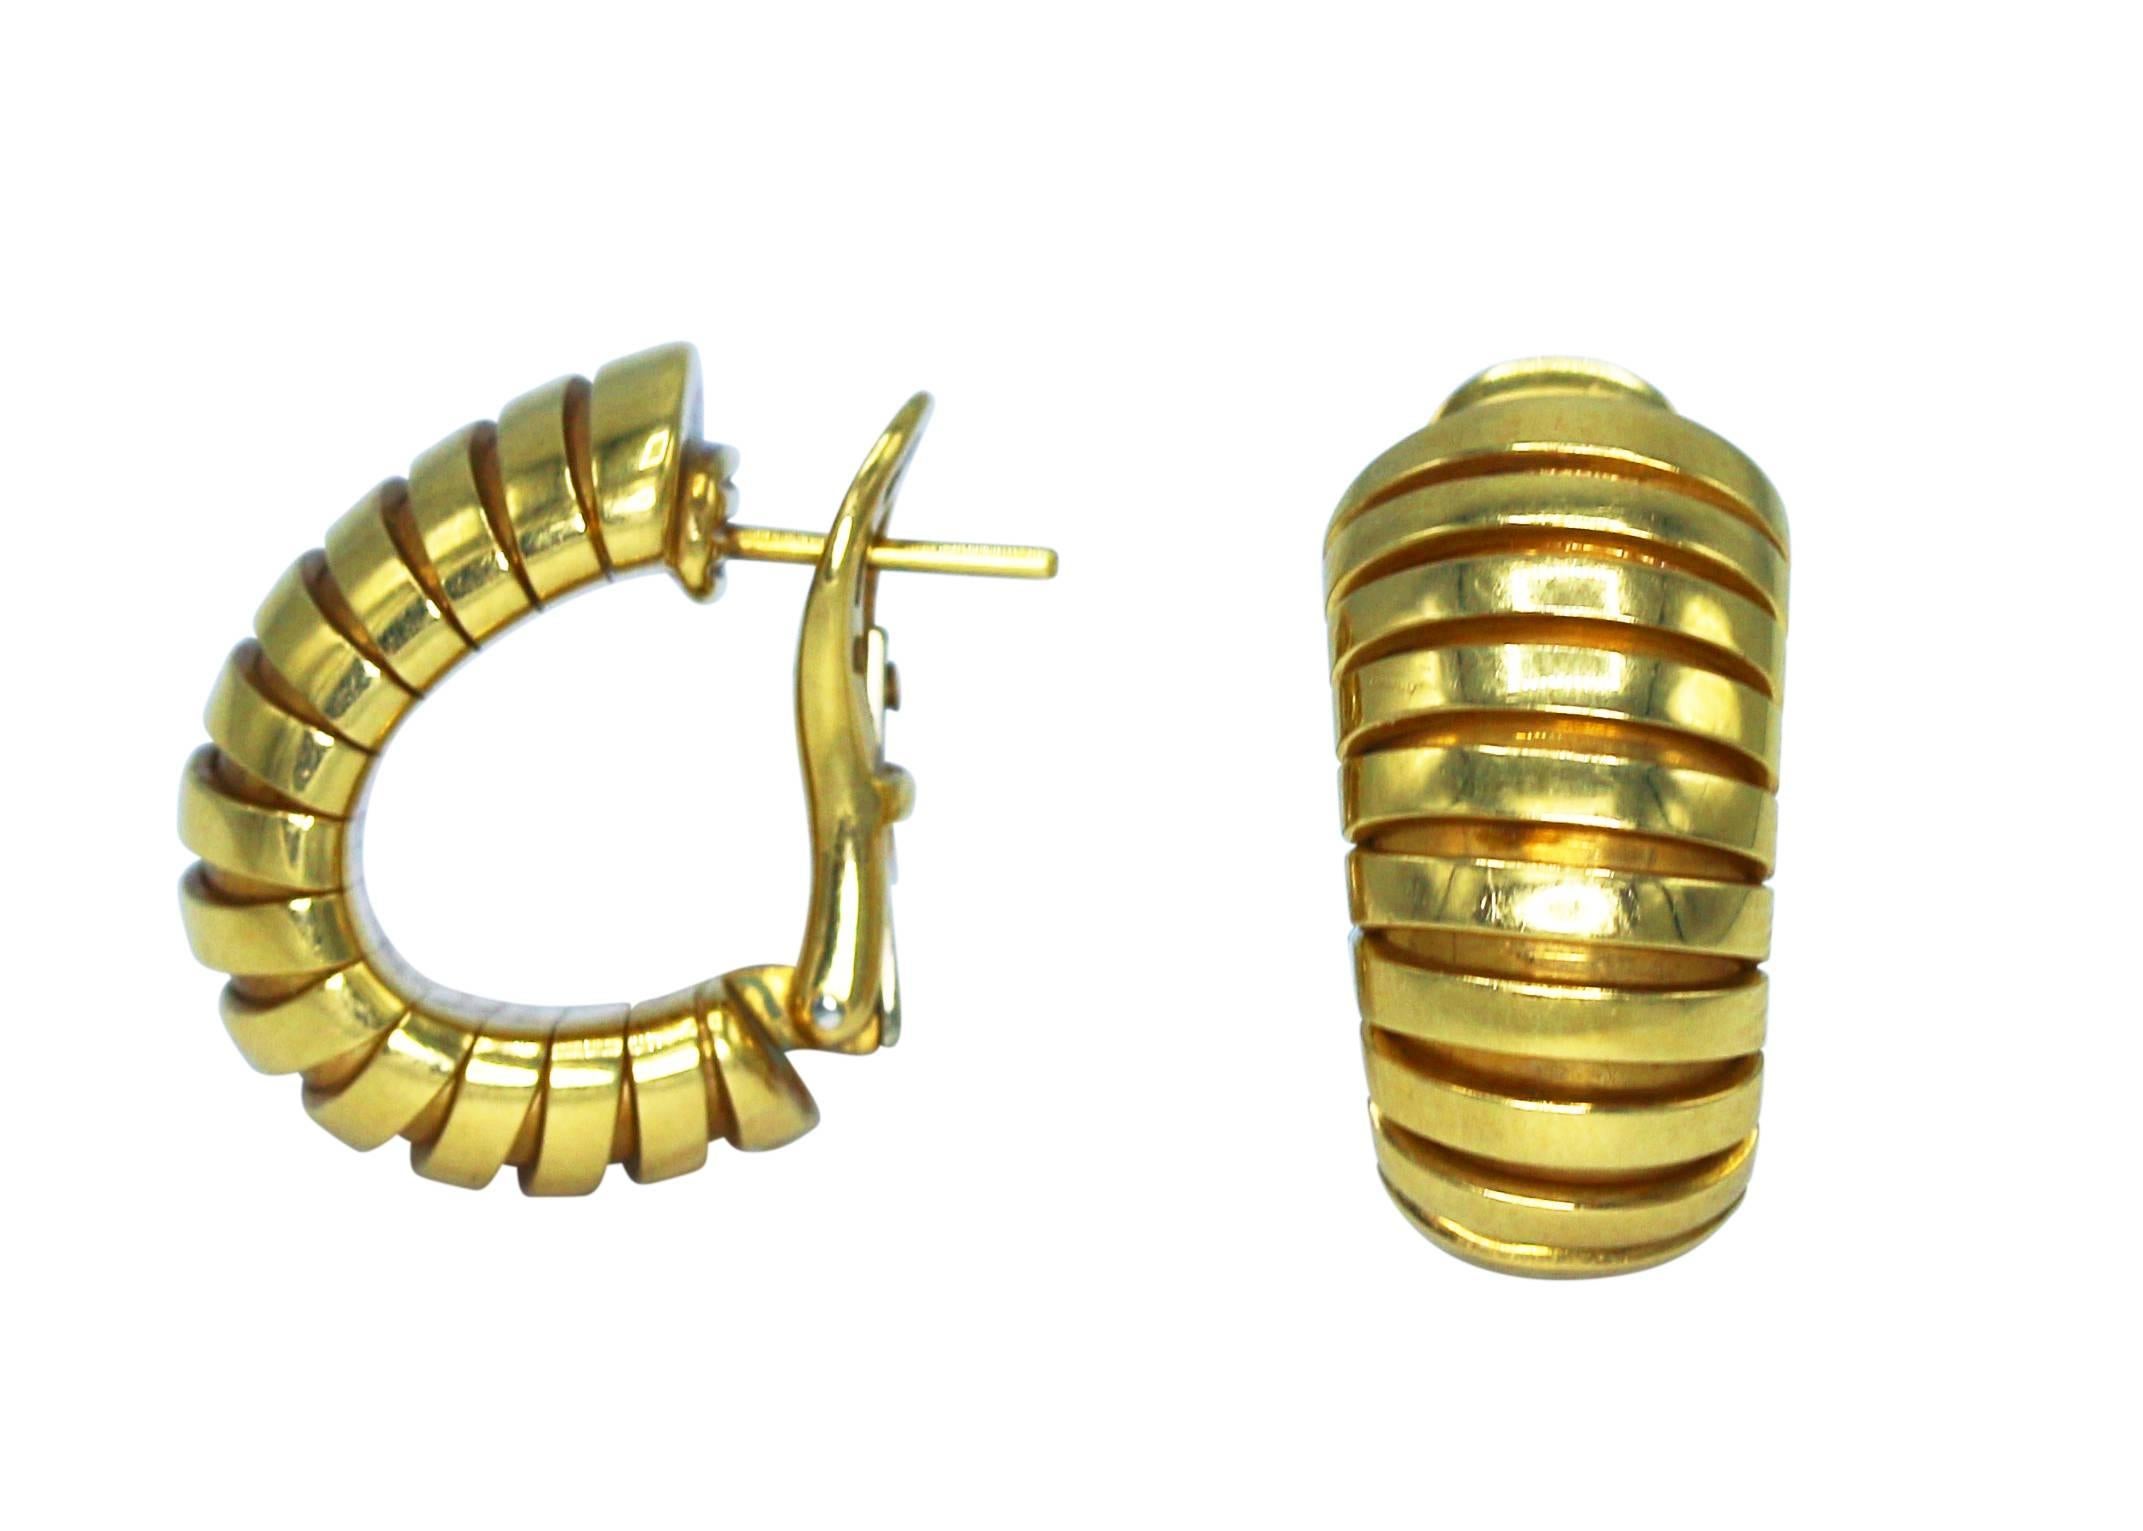 A pair of 18 karat yellow gold Tubogas earclips by Bulgari, Italy, of tapered design shaped as half hoops and designed as a series of Tubogas links, gross weight 29.6 grams, measuring 7/8 by 1/2 inch, signed Bulgari, with Italian gold marks. The